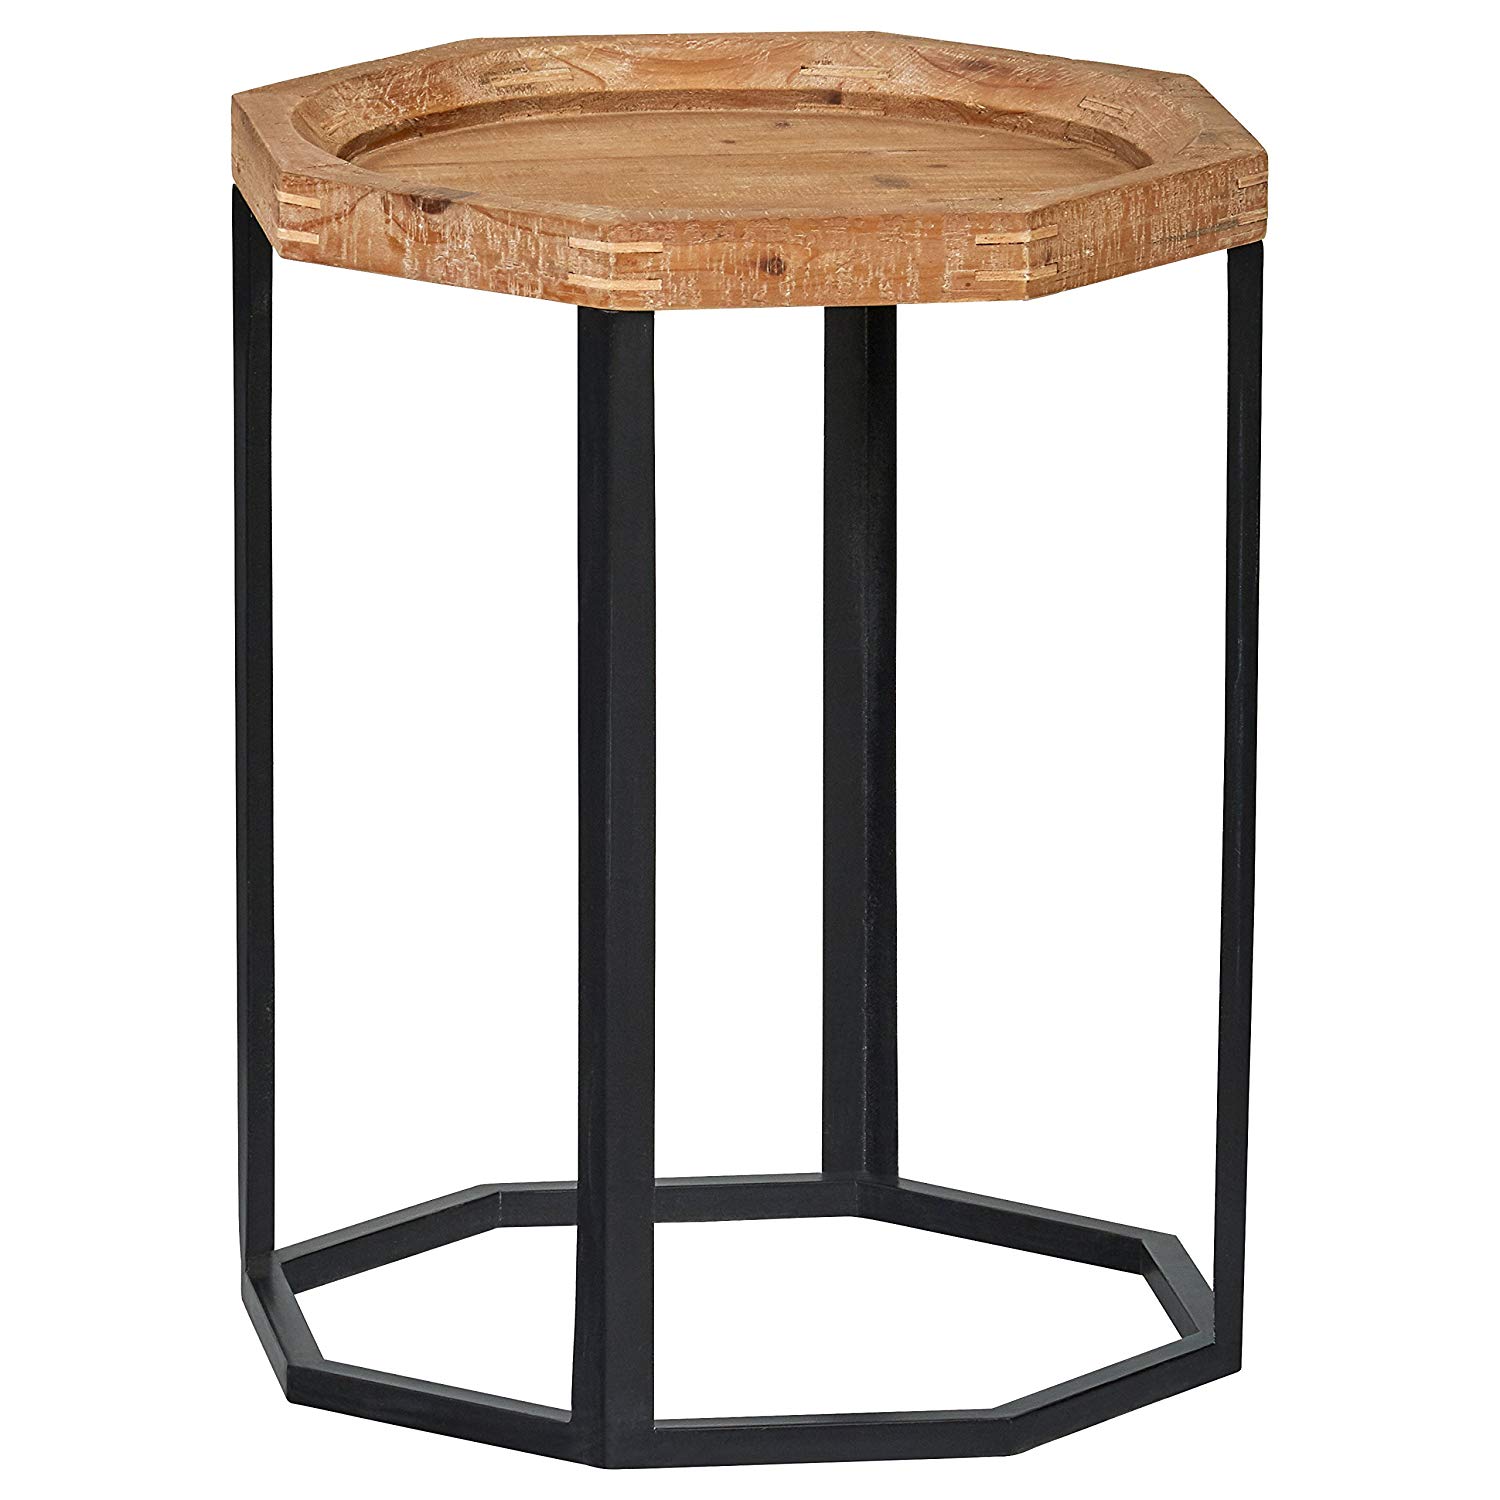 stone beam arie octagonal end table natural wood accent five below kitchen dining dark side contemporary garden furniture teal entryway round cardboard high distressed nightstand